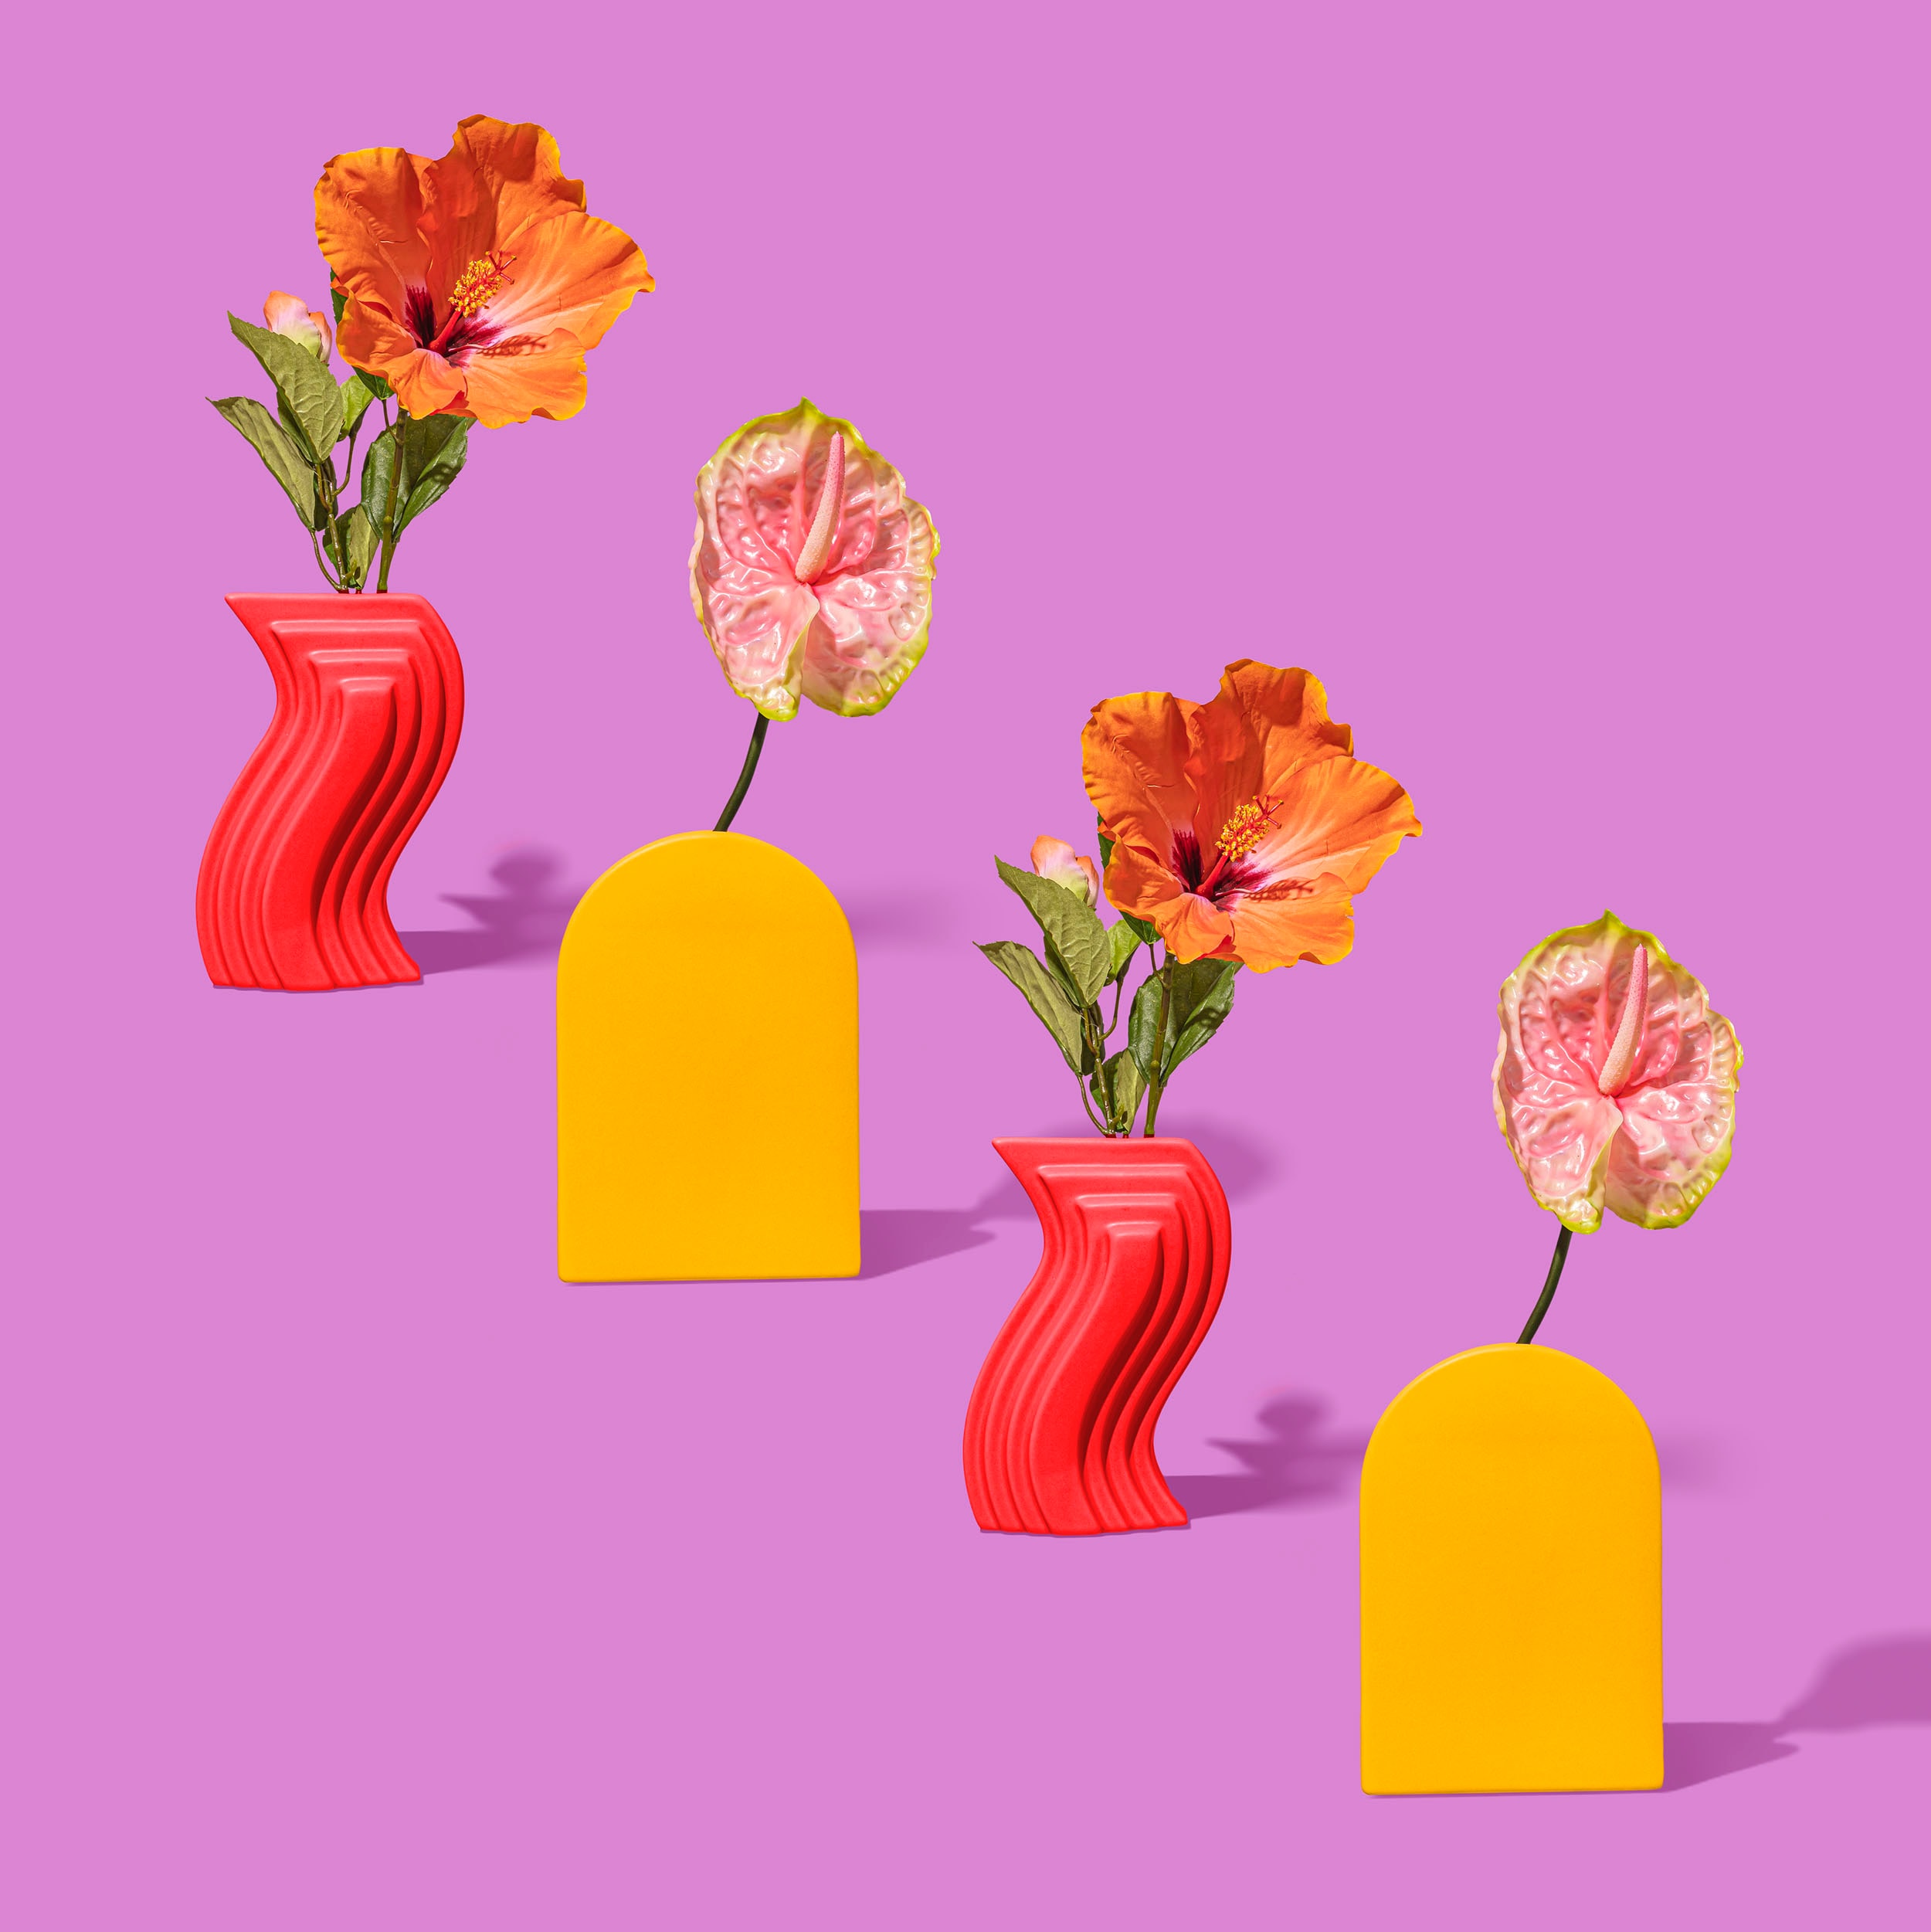 Tropical flowers in vases with a vibrant background.